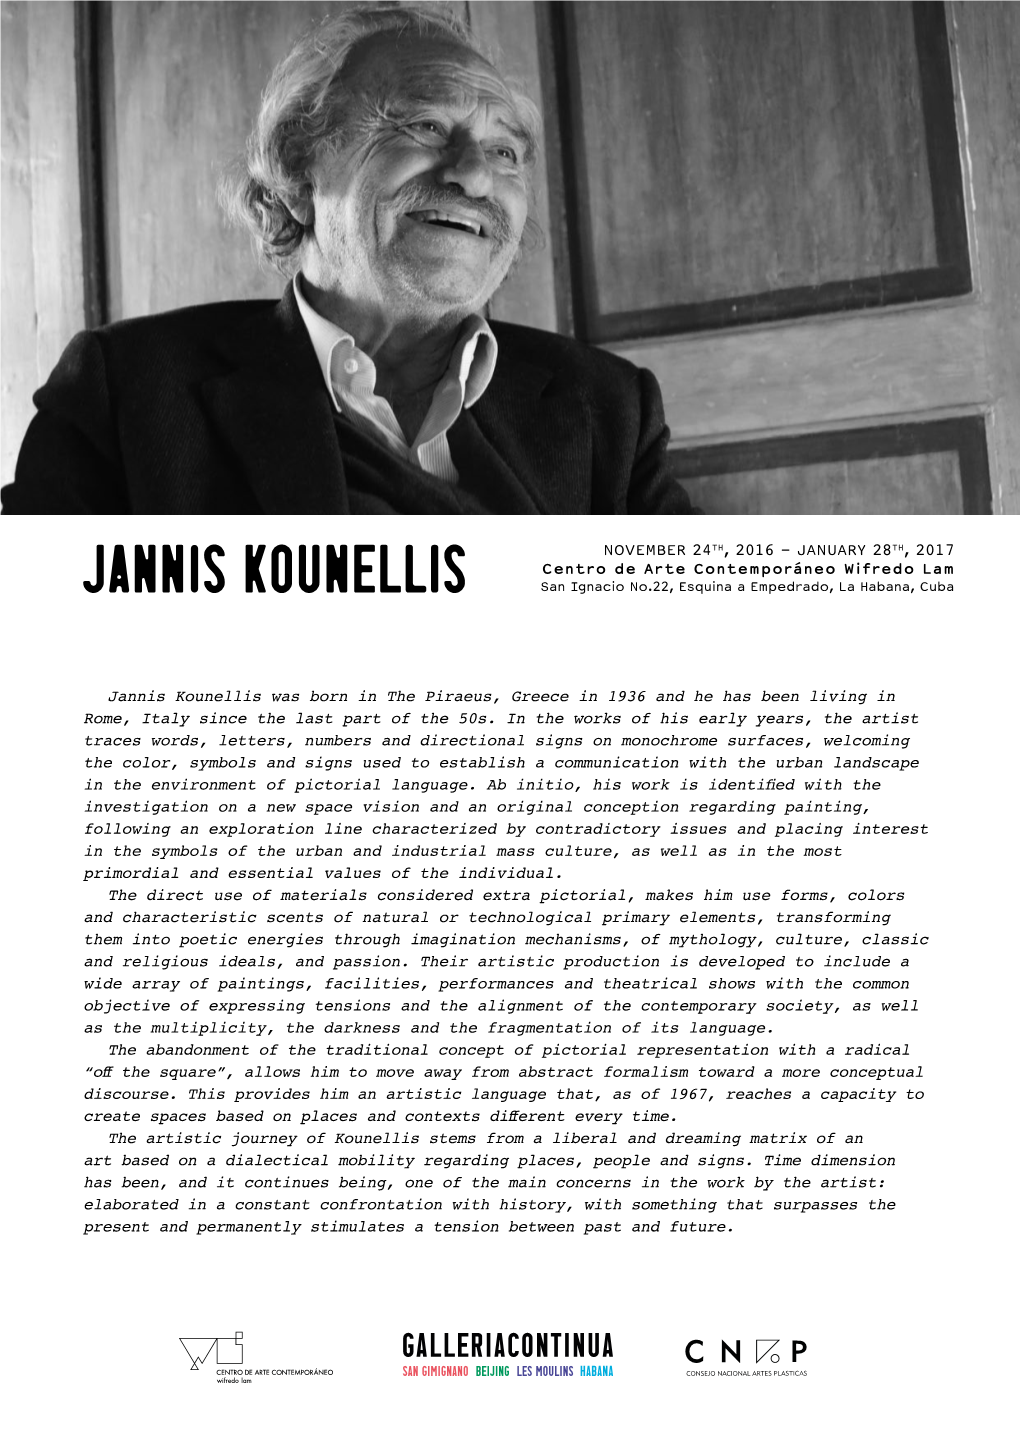 Jannis Kounellis Was Born in the Piraeus, Greece in 1936 and He Has Been Living in Rome, Italy Since the Last Part of the 50S